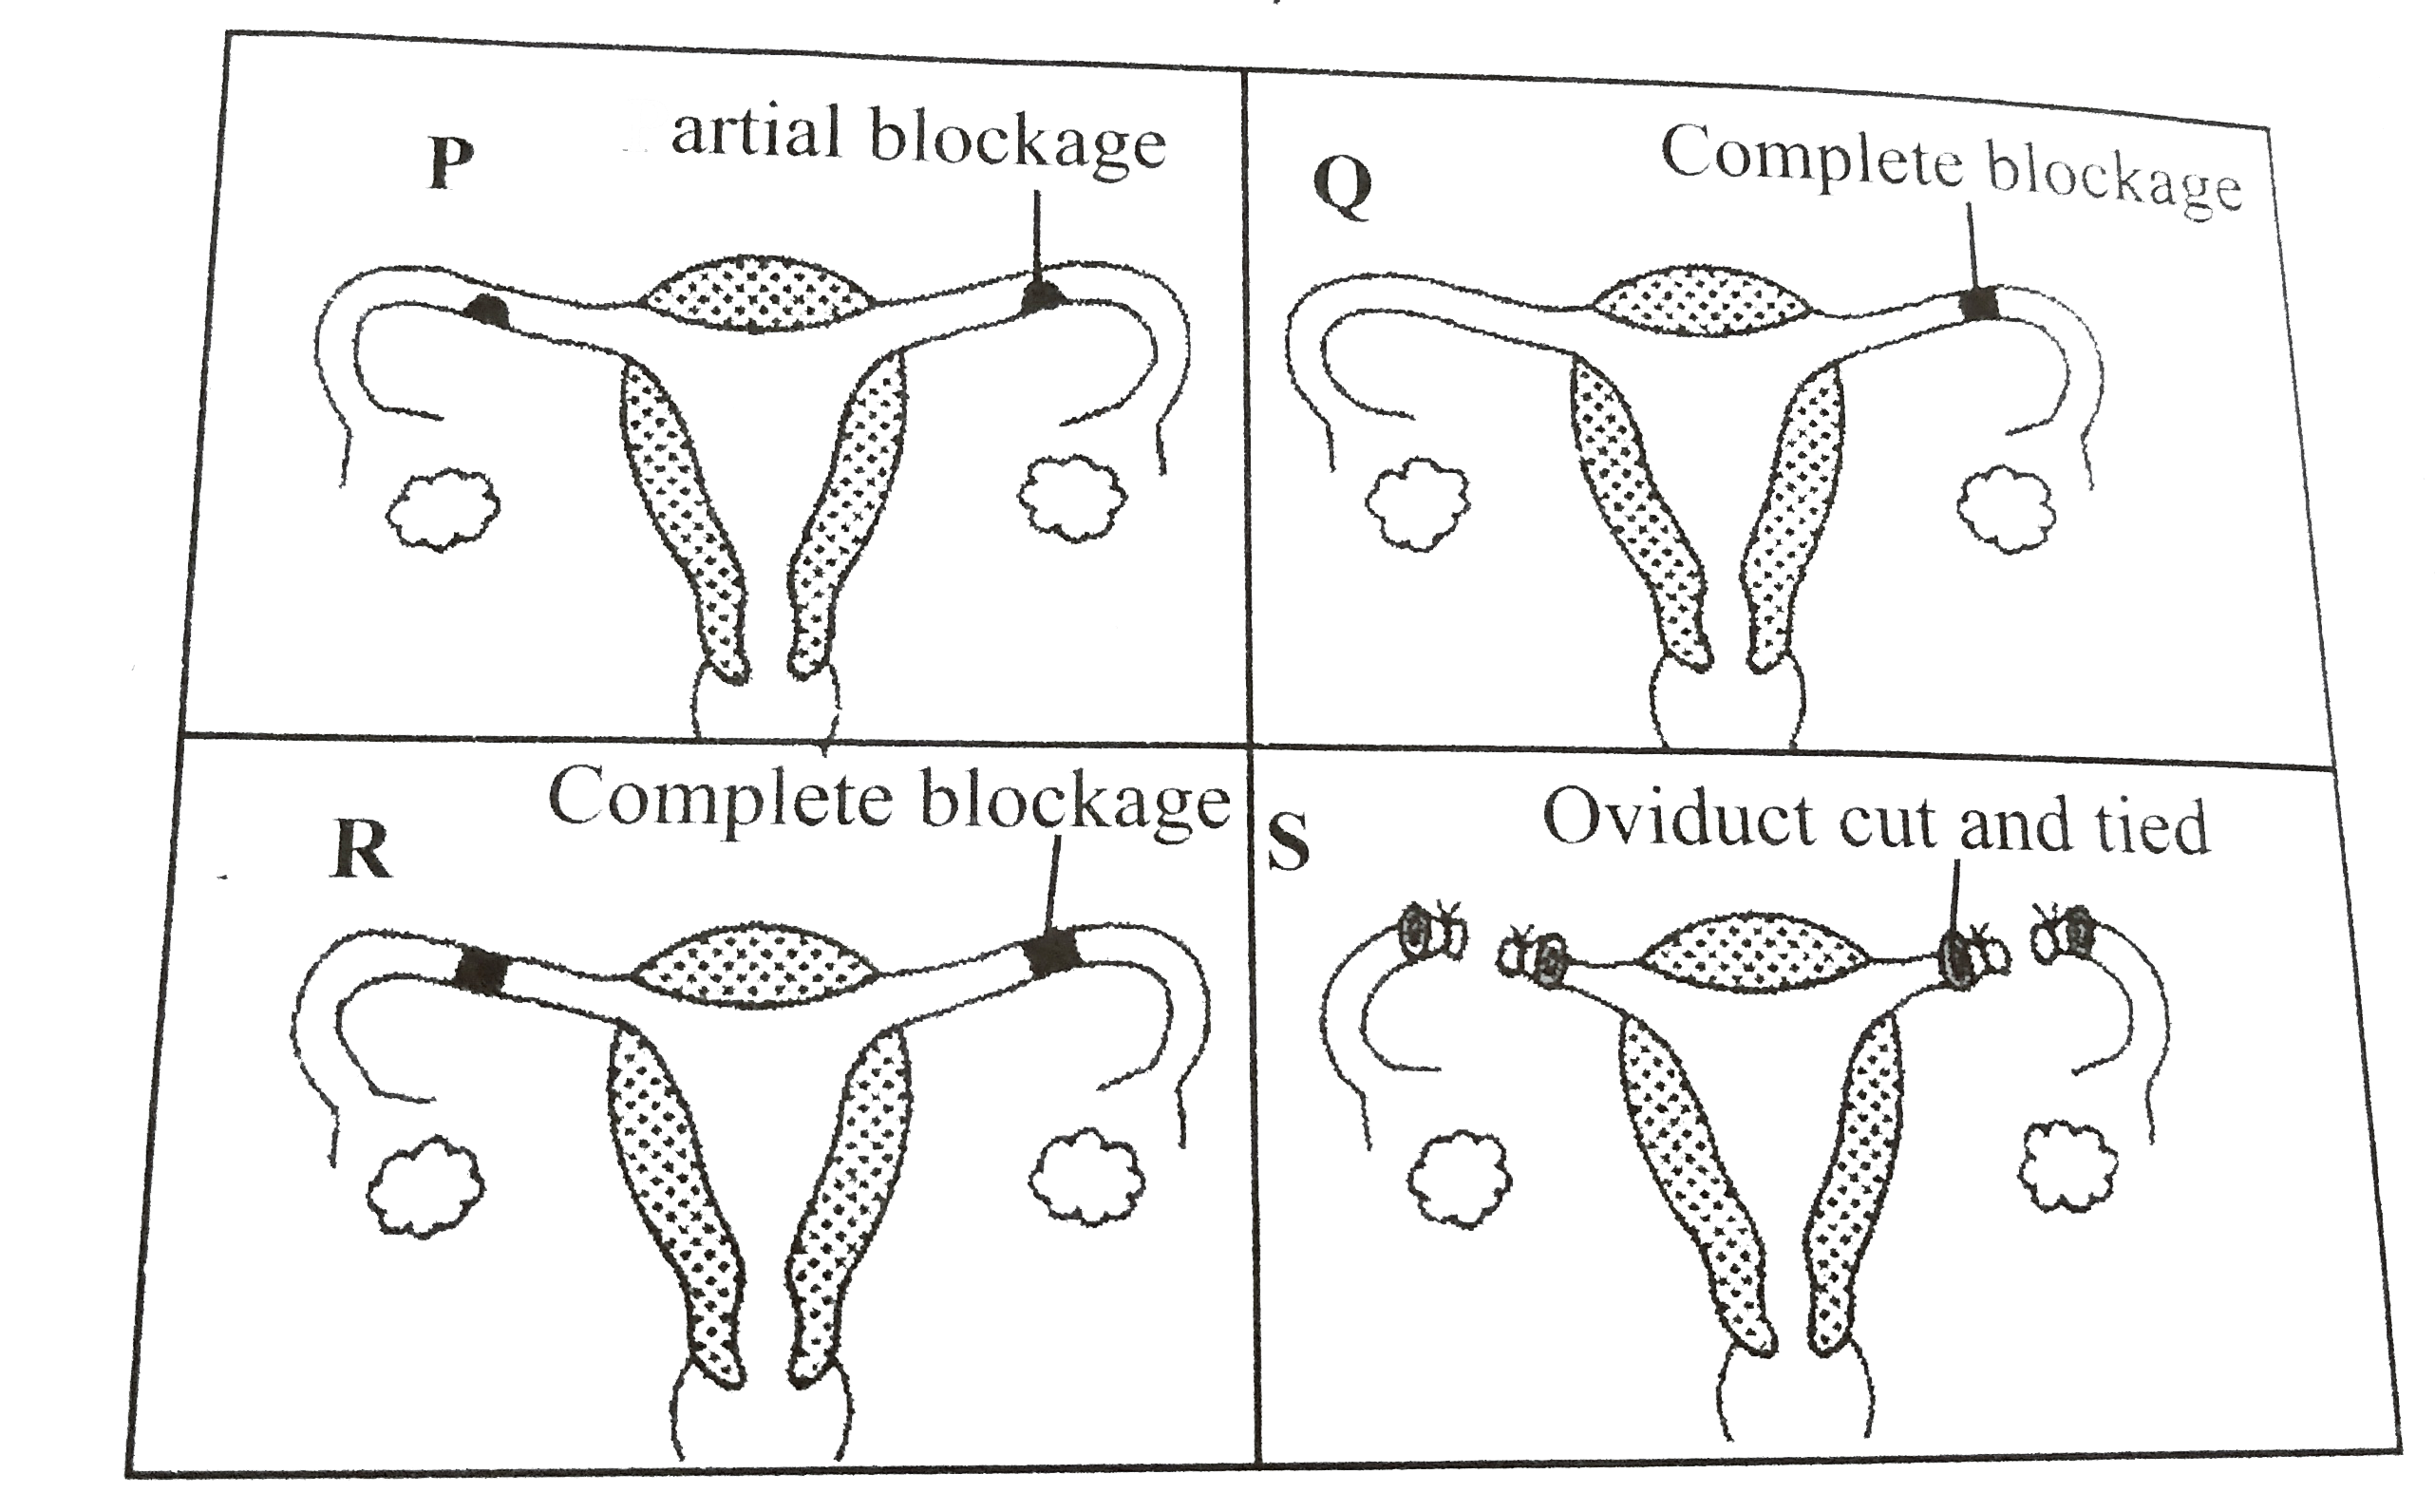 The accompanying diagram shows the uterine tubes of four women (P,Q,R and S)      In which two women is fertilisation impossible at present ?